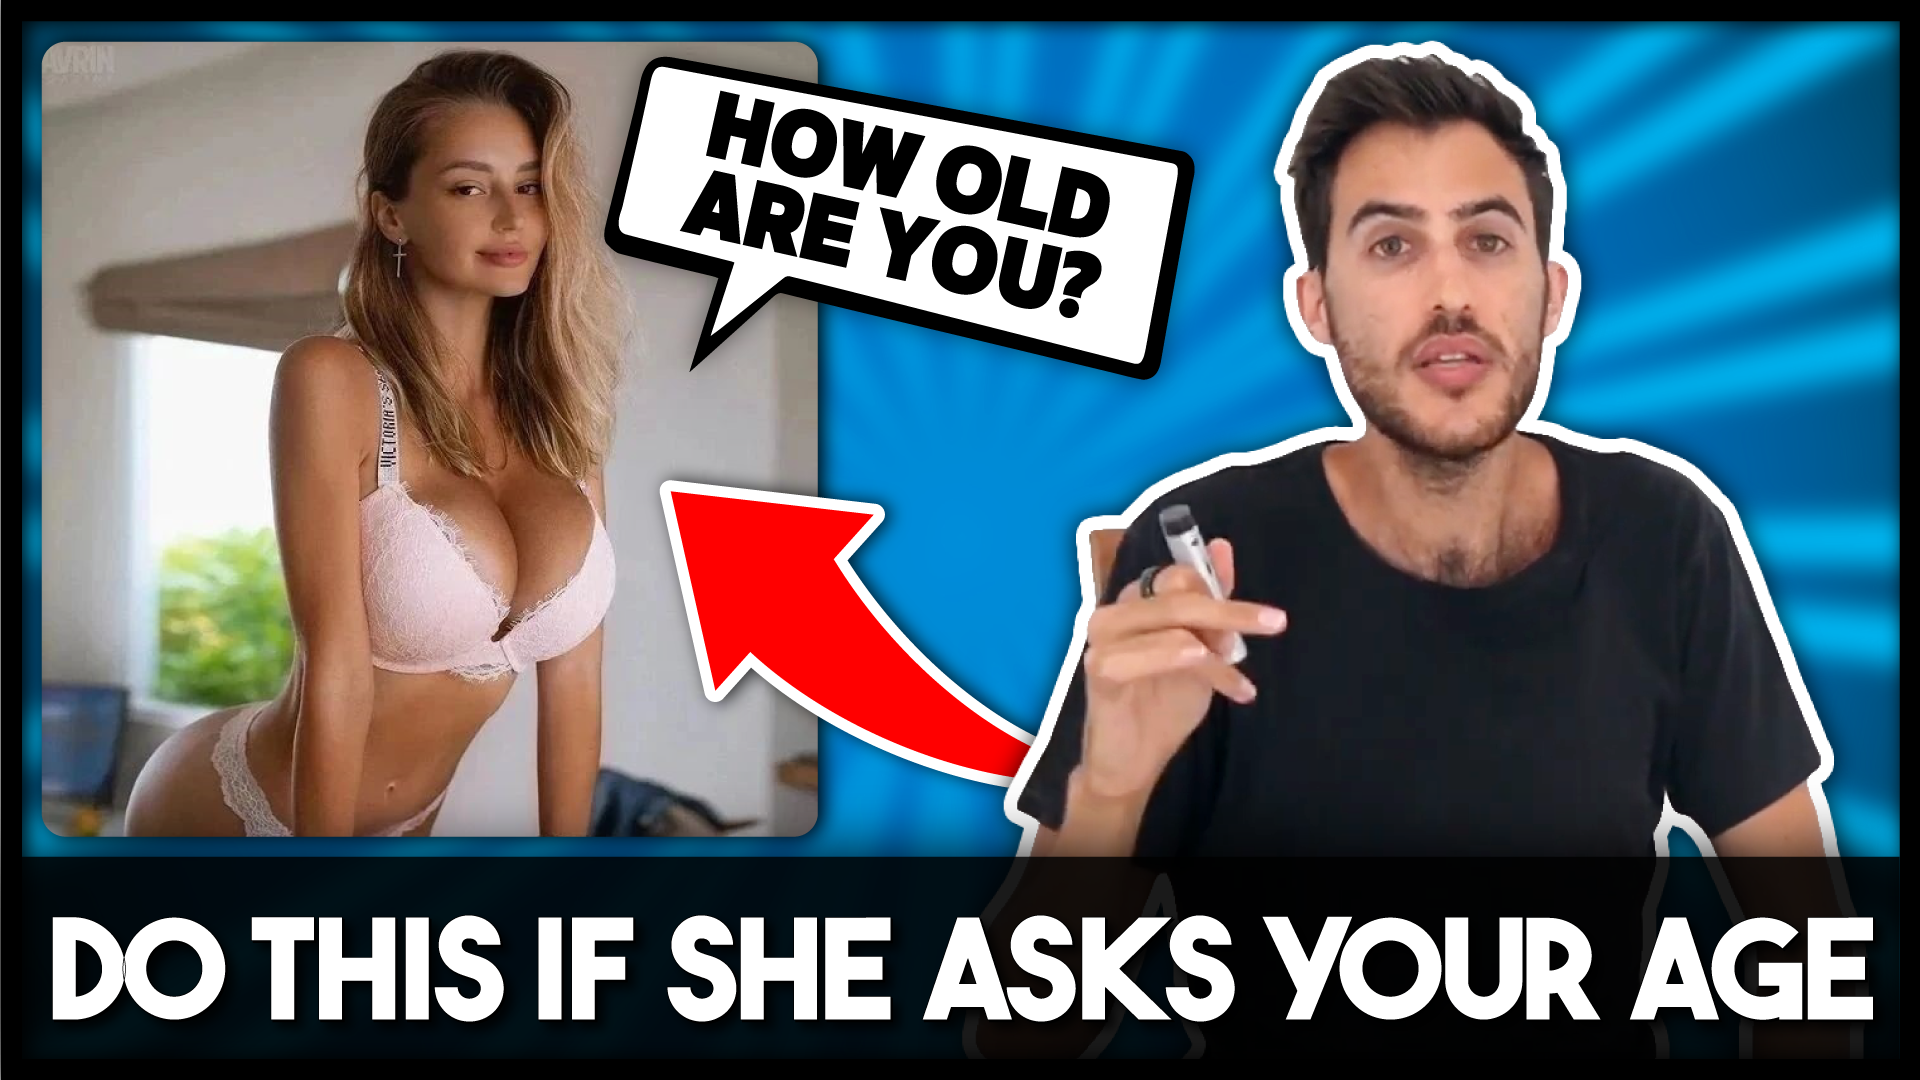 What to do if she asks how old you are